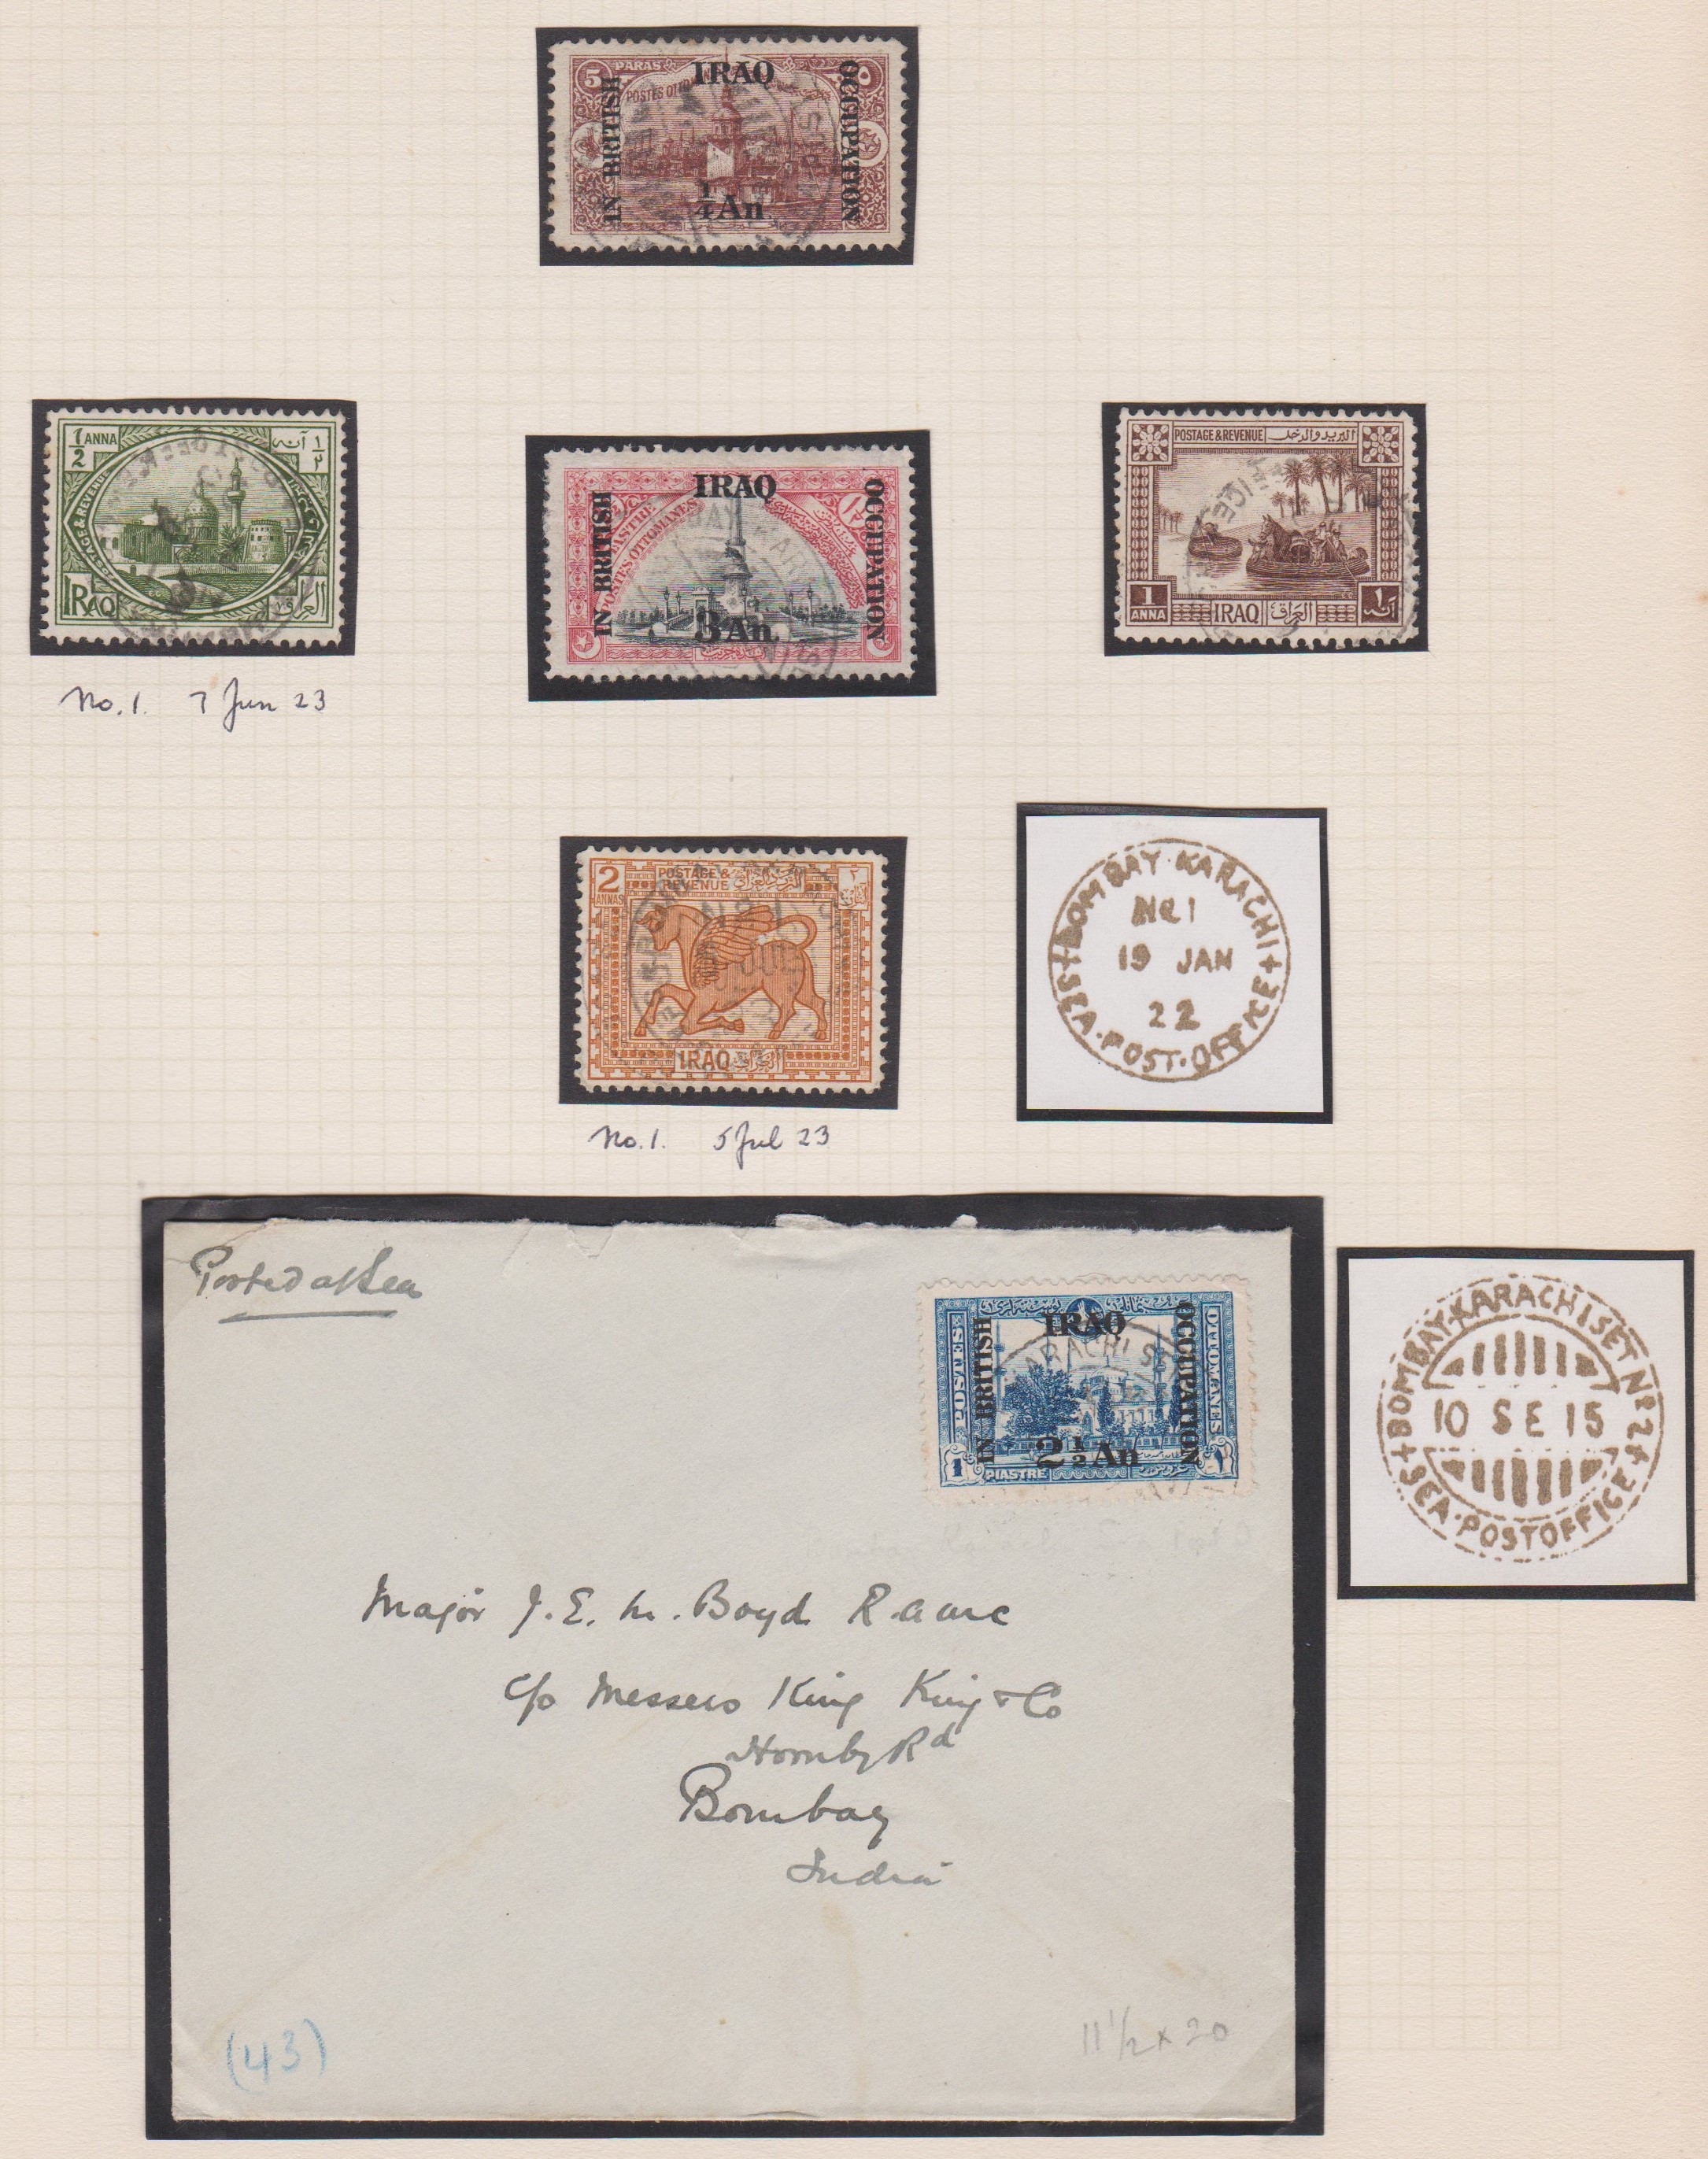 Iraq 1915-23-Album page of (5) neatly mounted stamps and a cover - cancelled Bombay-Karachi Sea Post